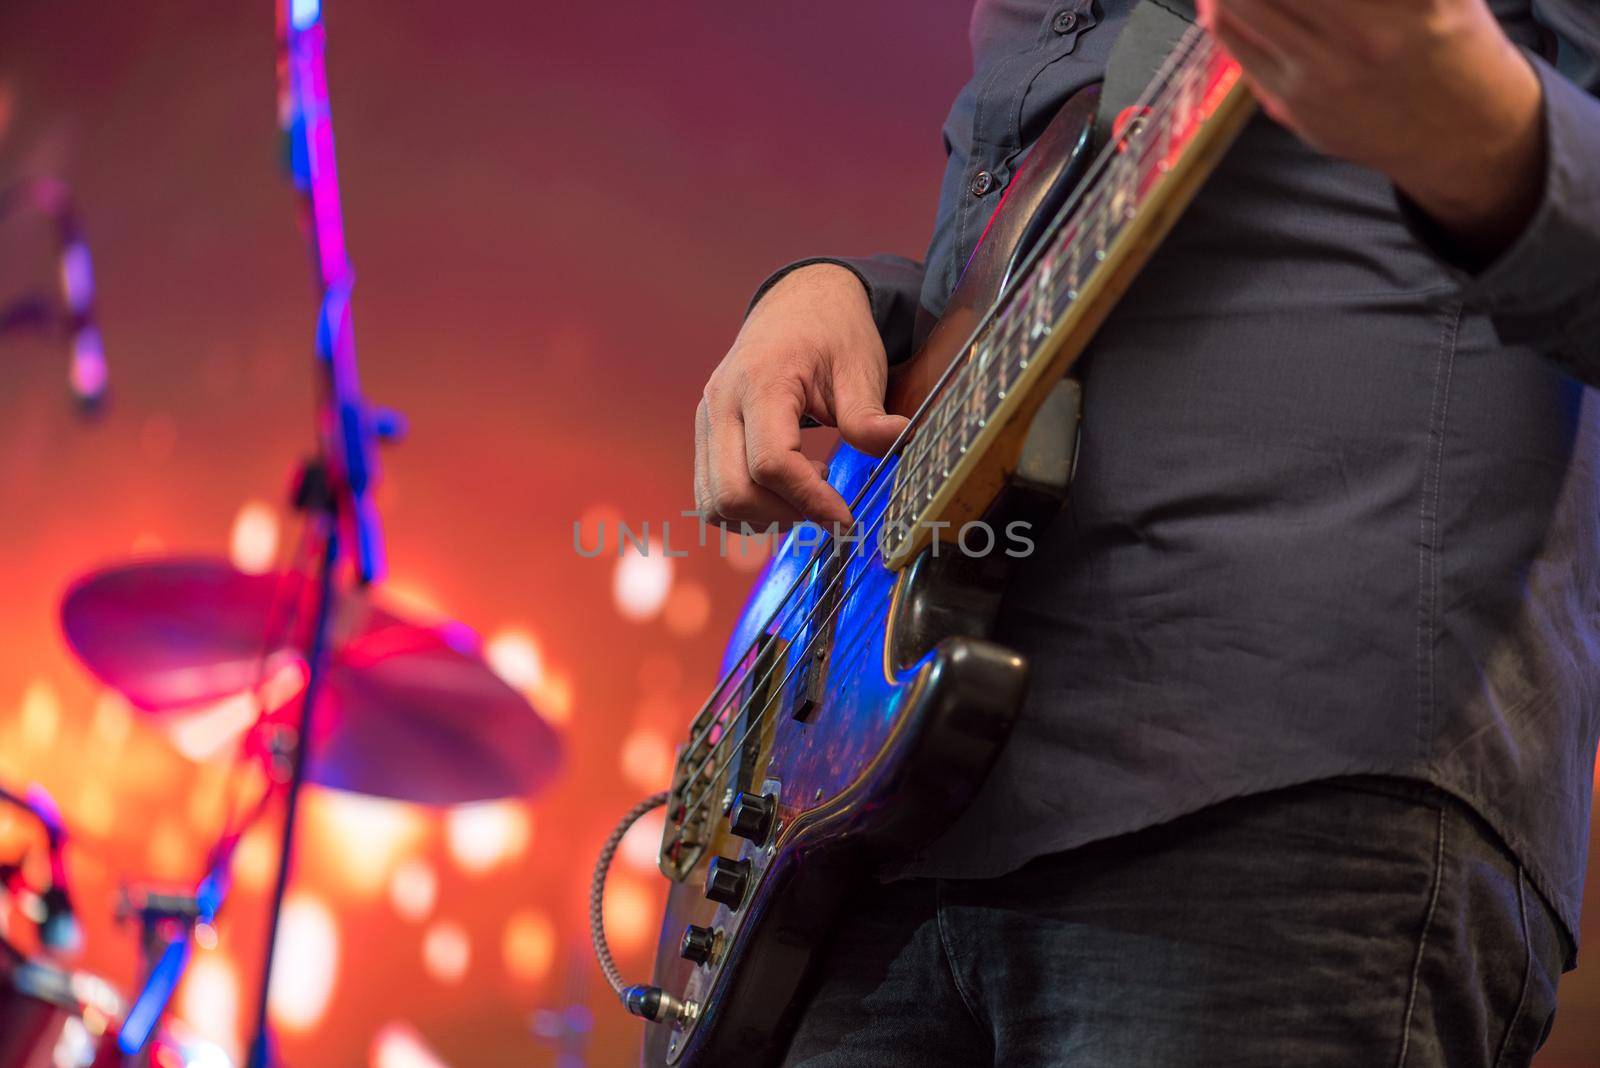 Man playing guitar on a stage musical concert close-up view.